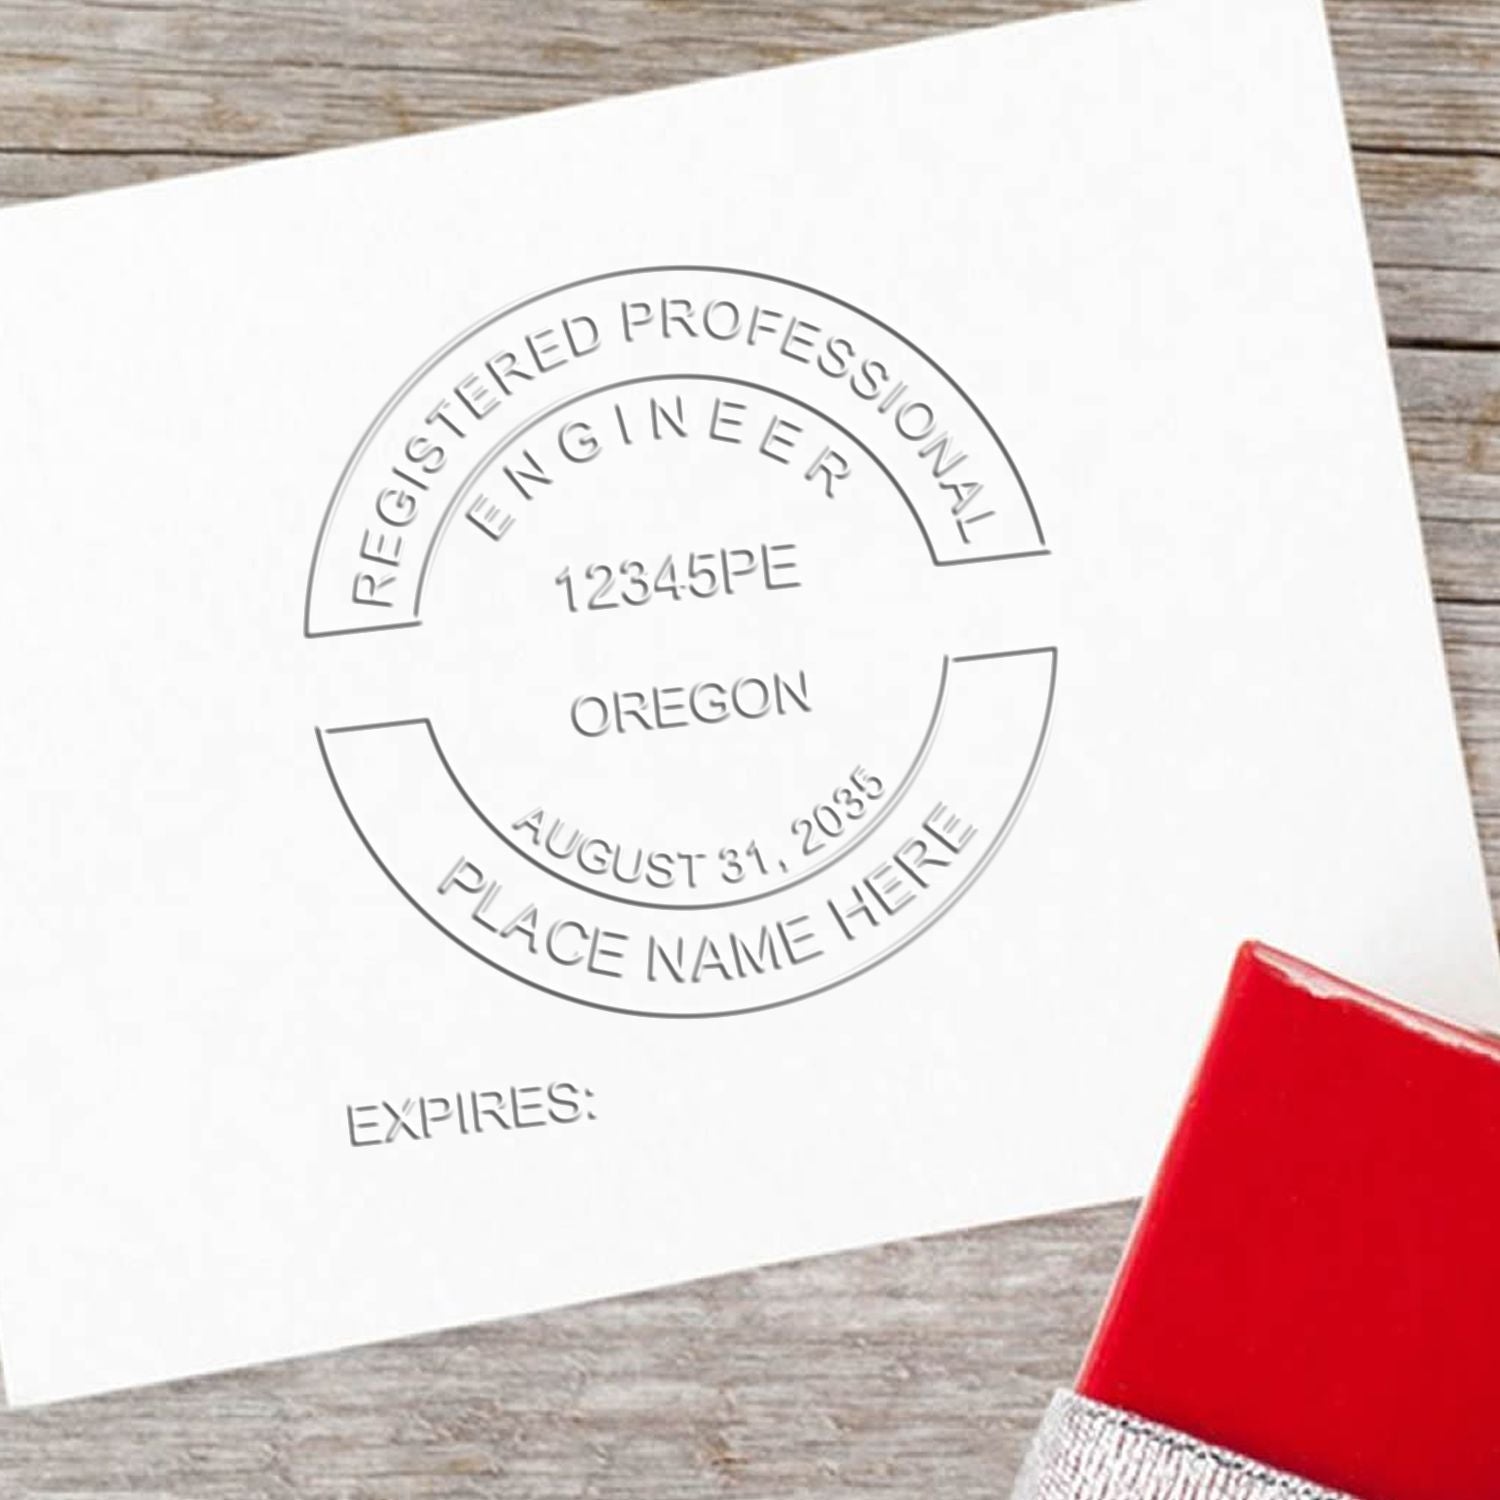 An alternative view of the State of Oregon Extended Long Reach Engineer Seal stamped on a sheet of paper showing the image in use